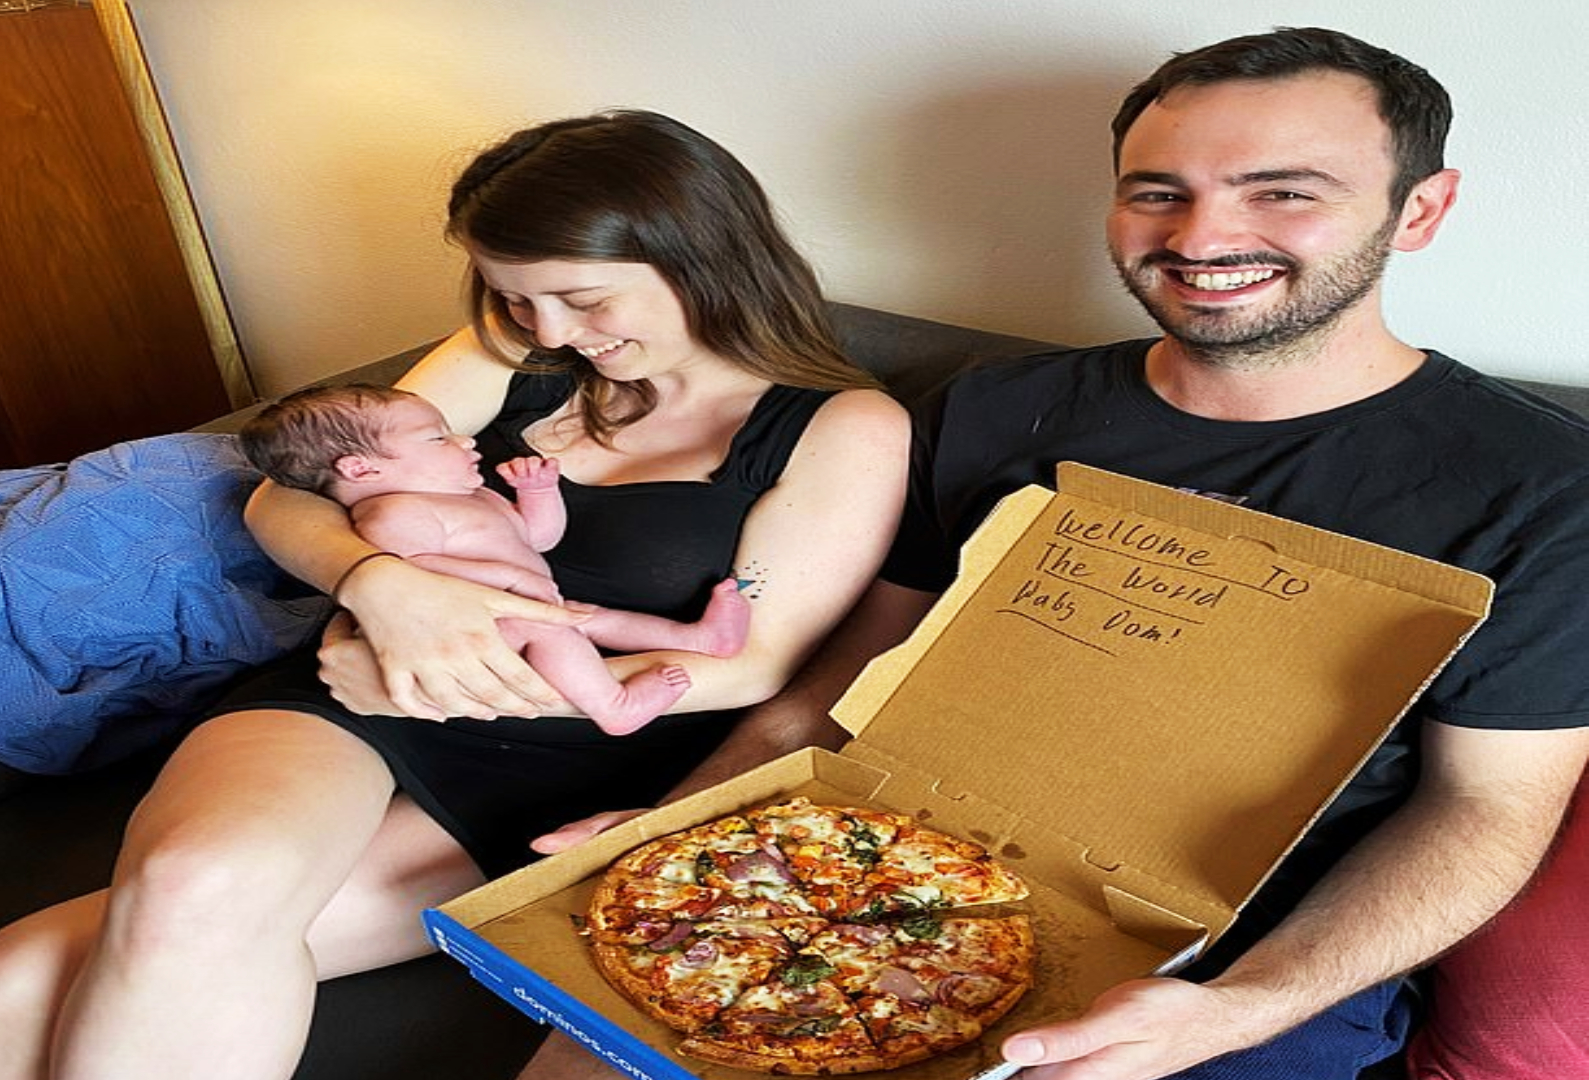 Australia Couple Names Their Baby Dominic Gets Free Pizza For 60 Years